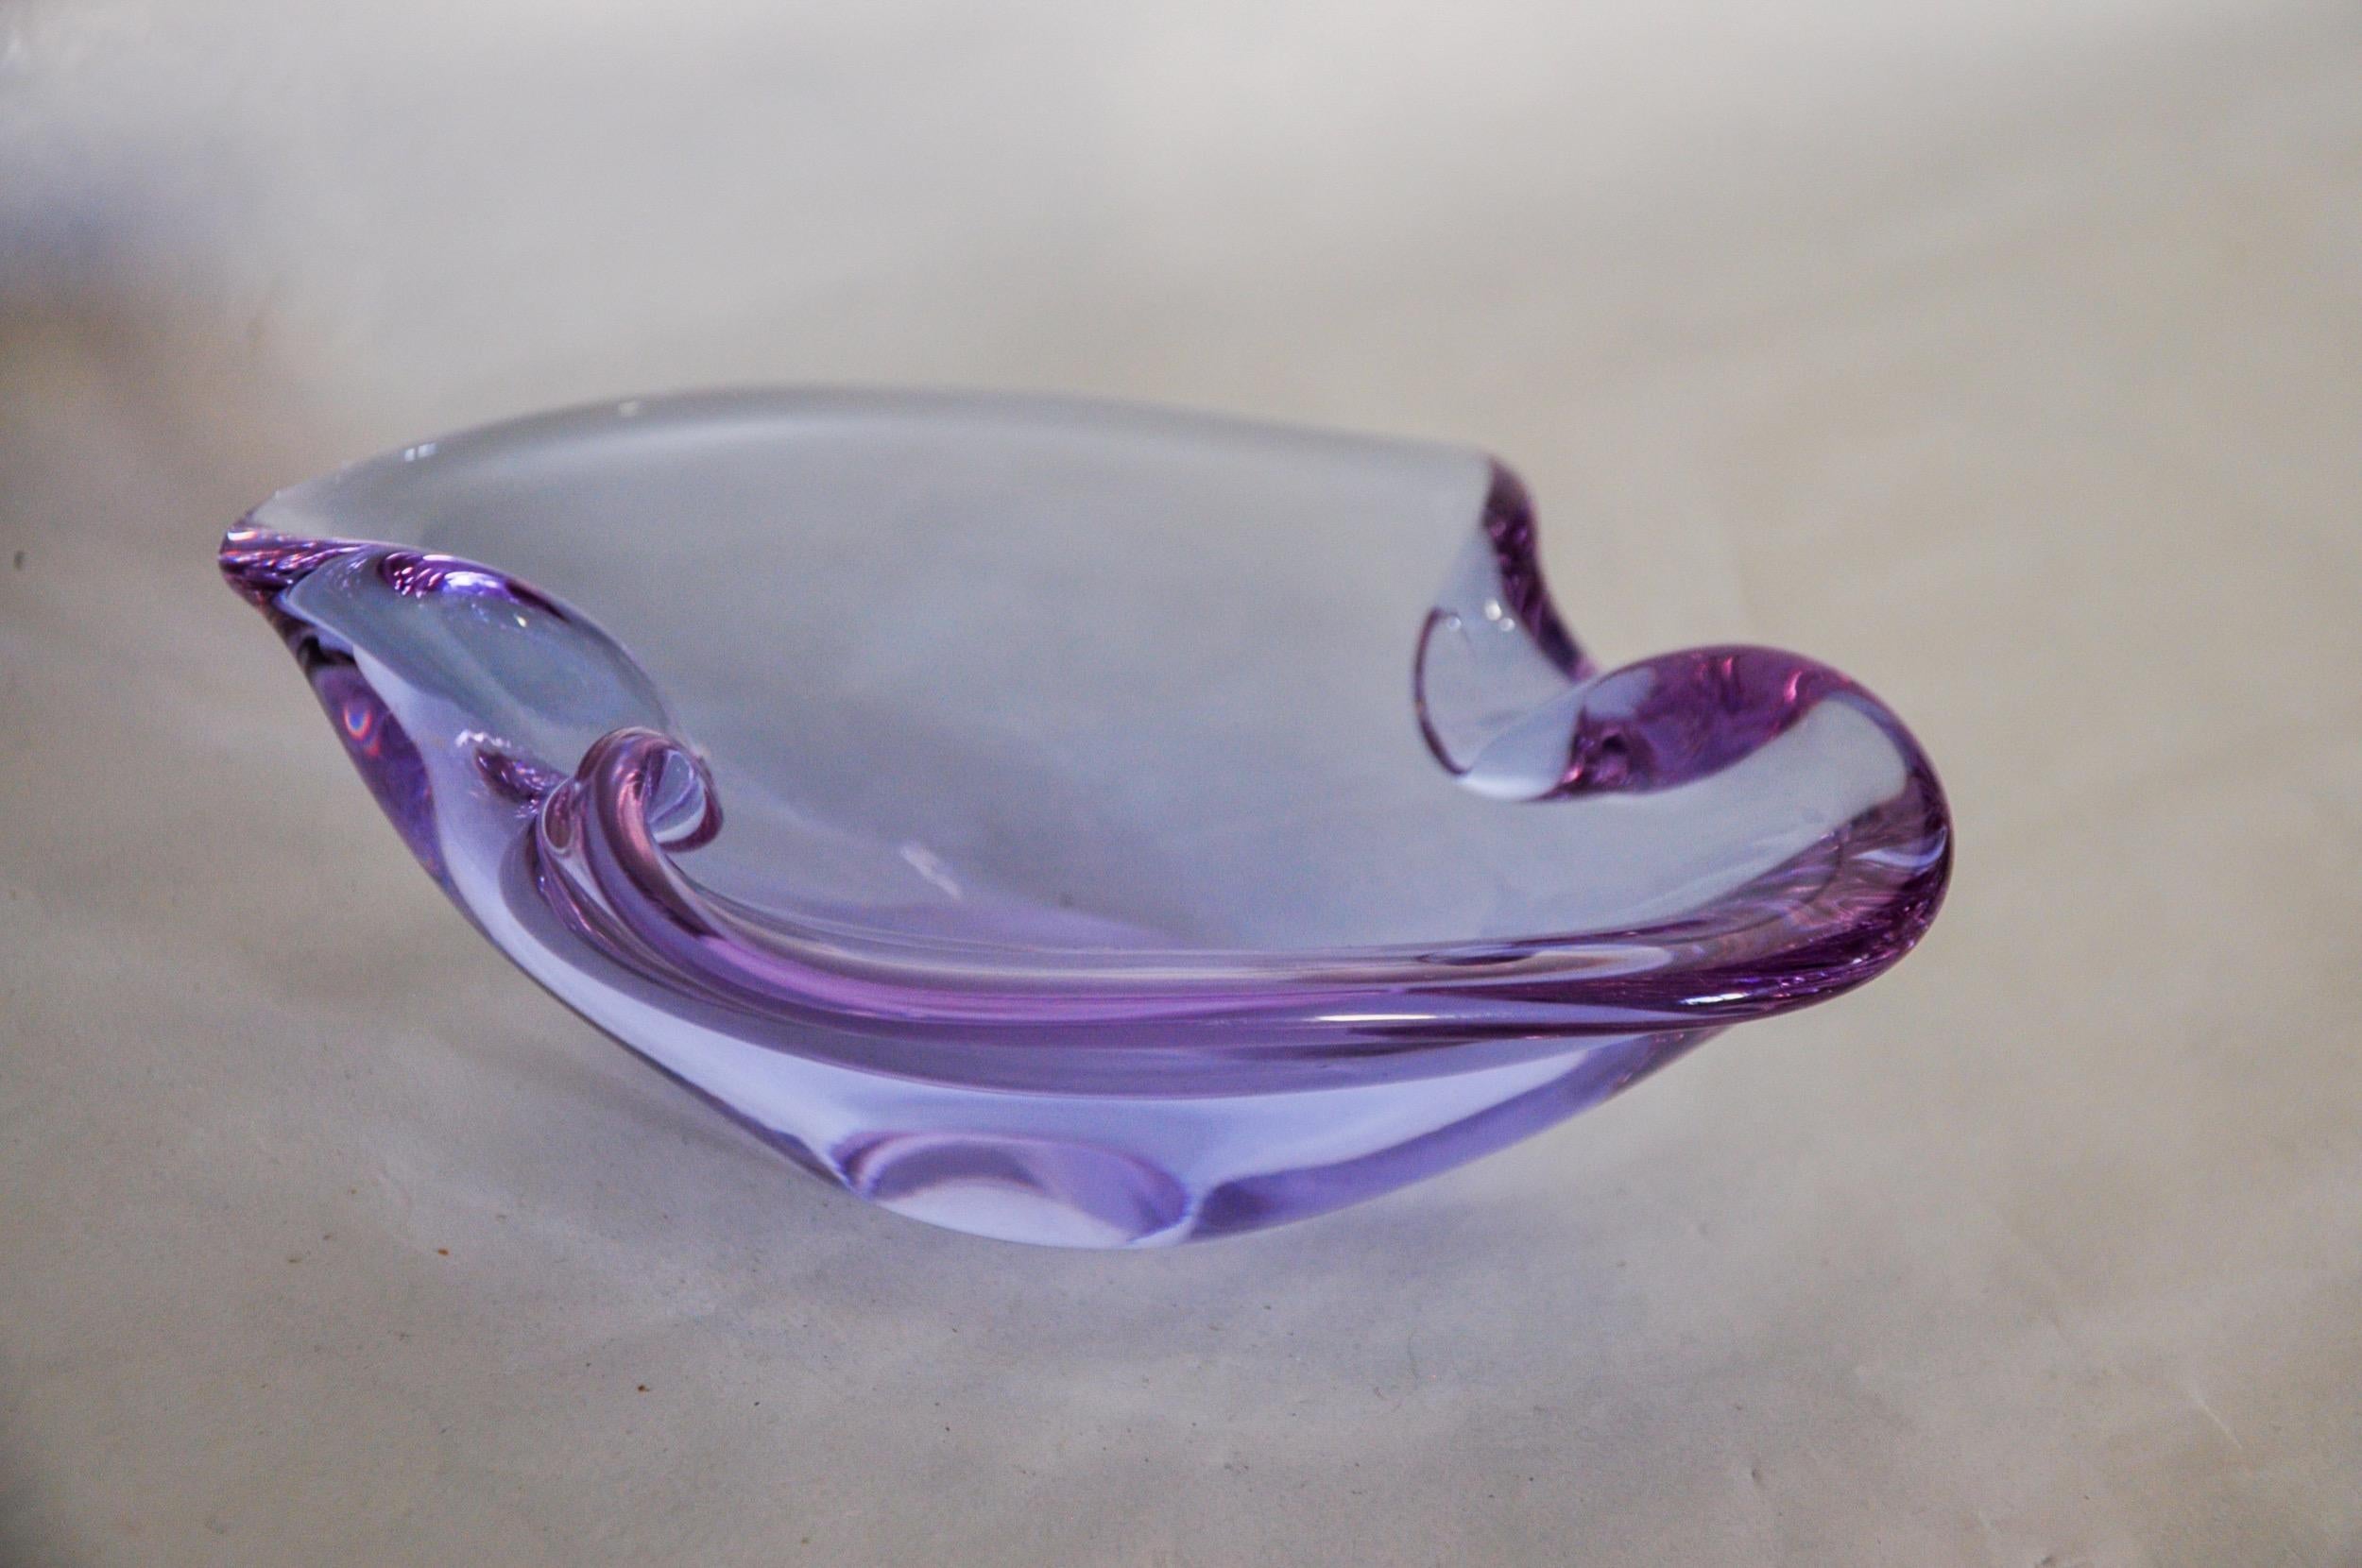 Superb and rare Sommerso purple ashtray designed and manufactured for Seguso in Murano in the 1970s. Handcrafted glass using the Sommerso technique (superposition of layers of molten glass). Magnificent object of collection and decoration. Perfect